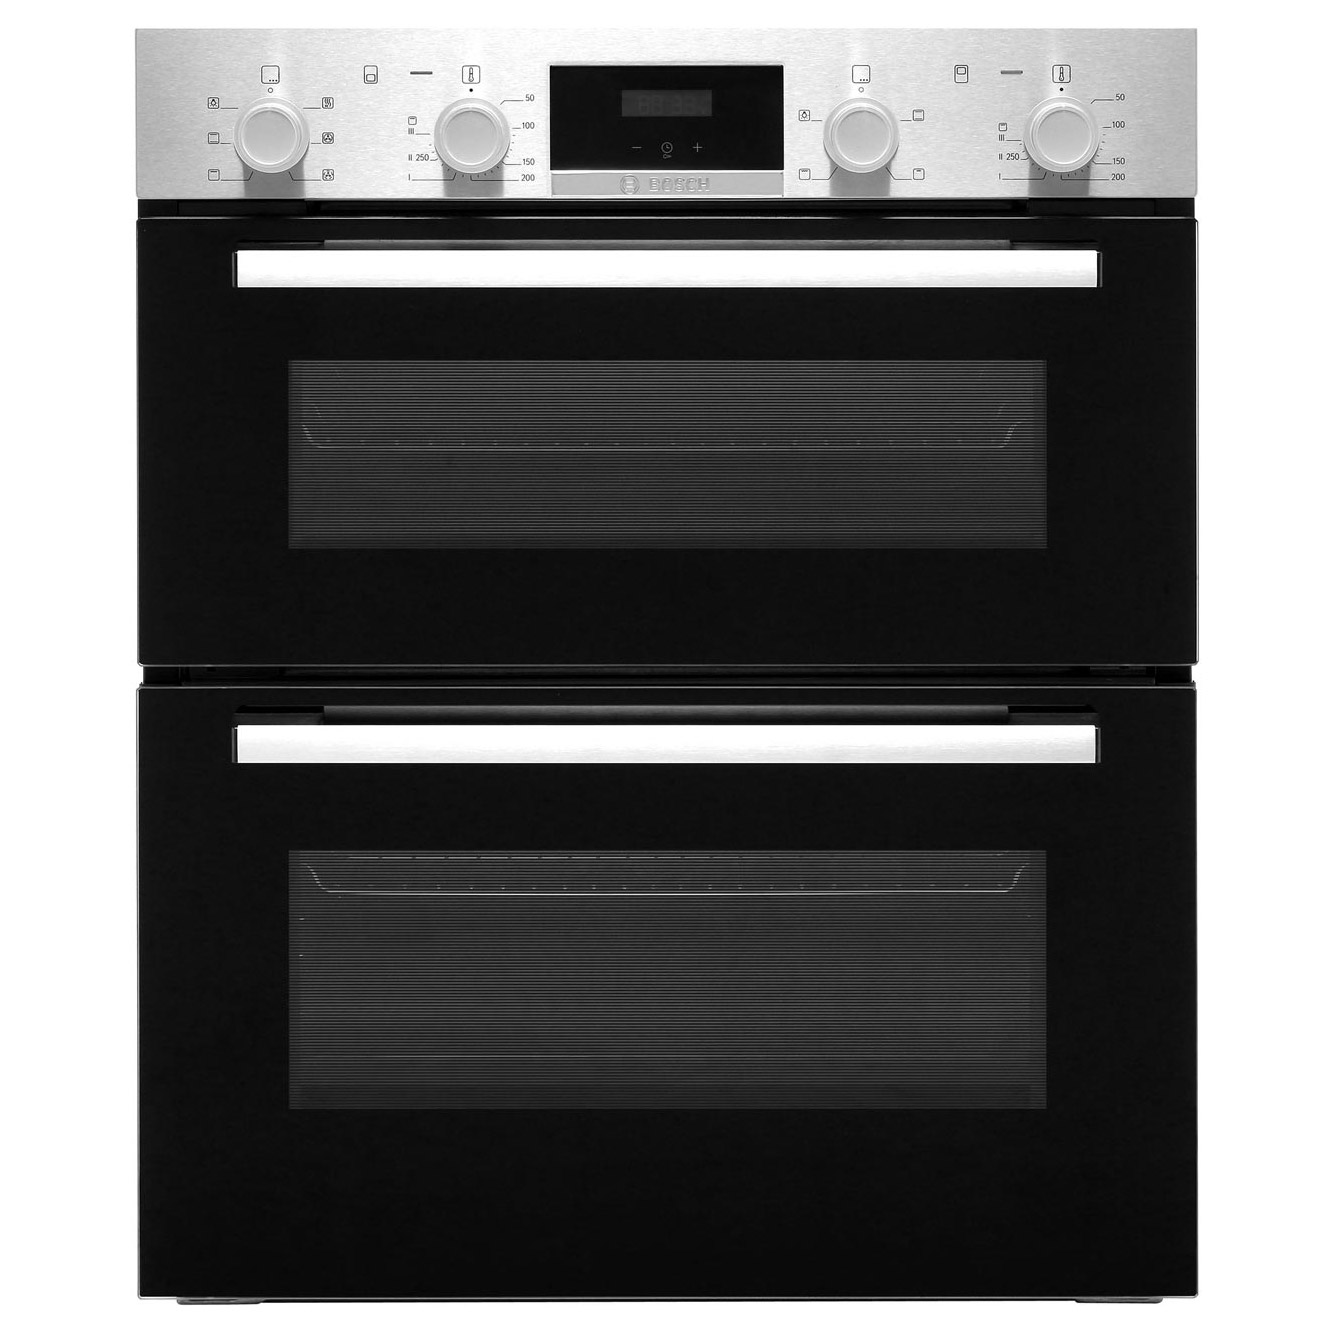 Image of Bosch NBS113BR0B Series 2 Built Under Electric Double Oven in St Steel